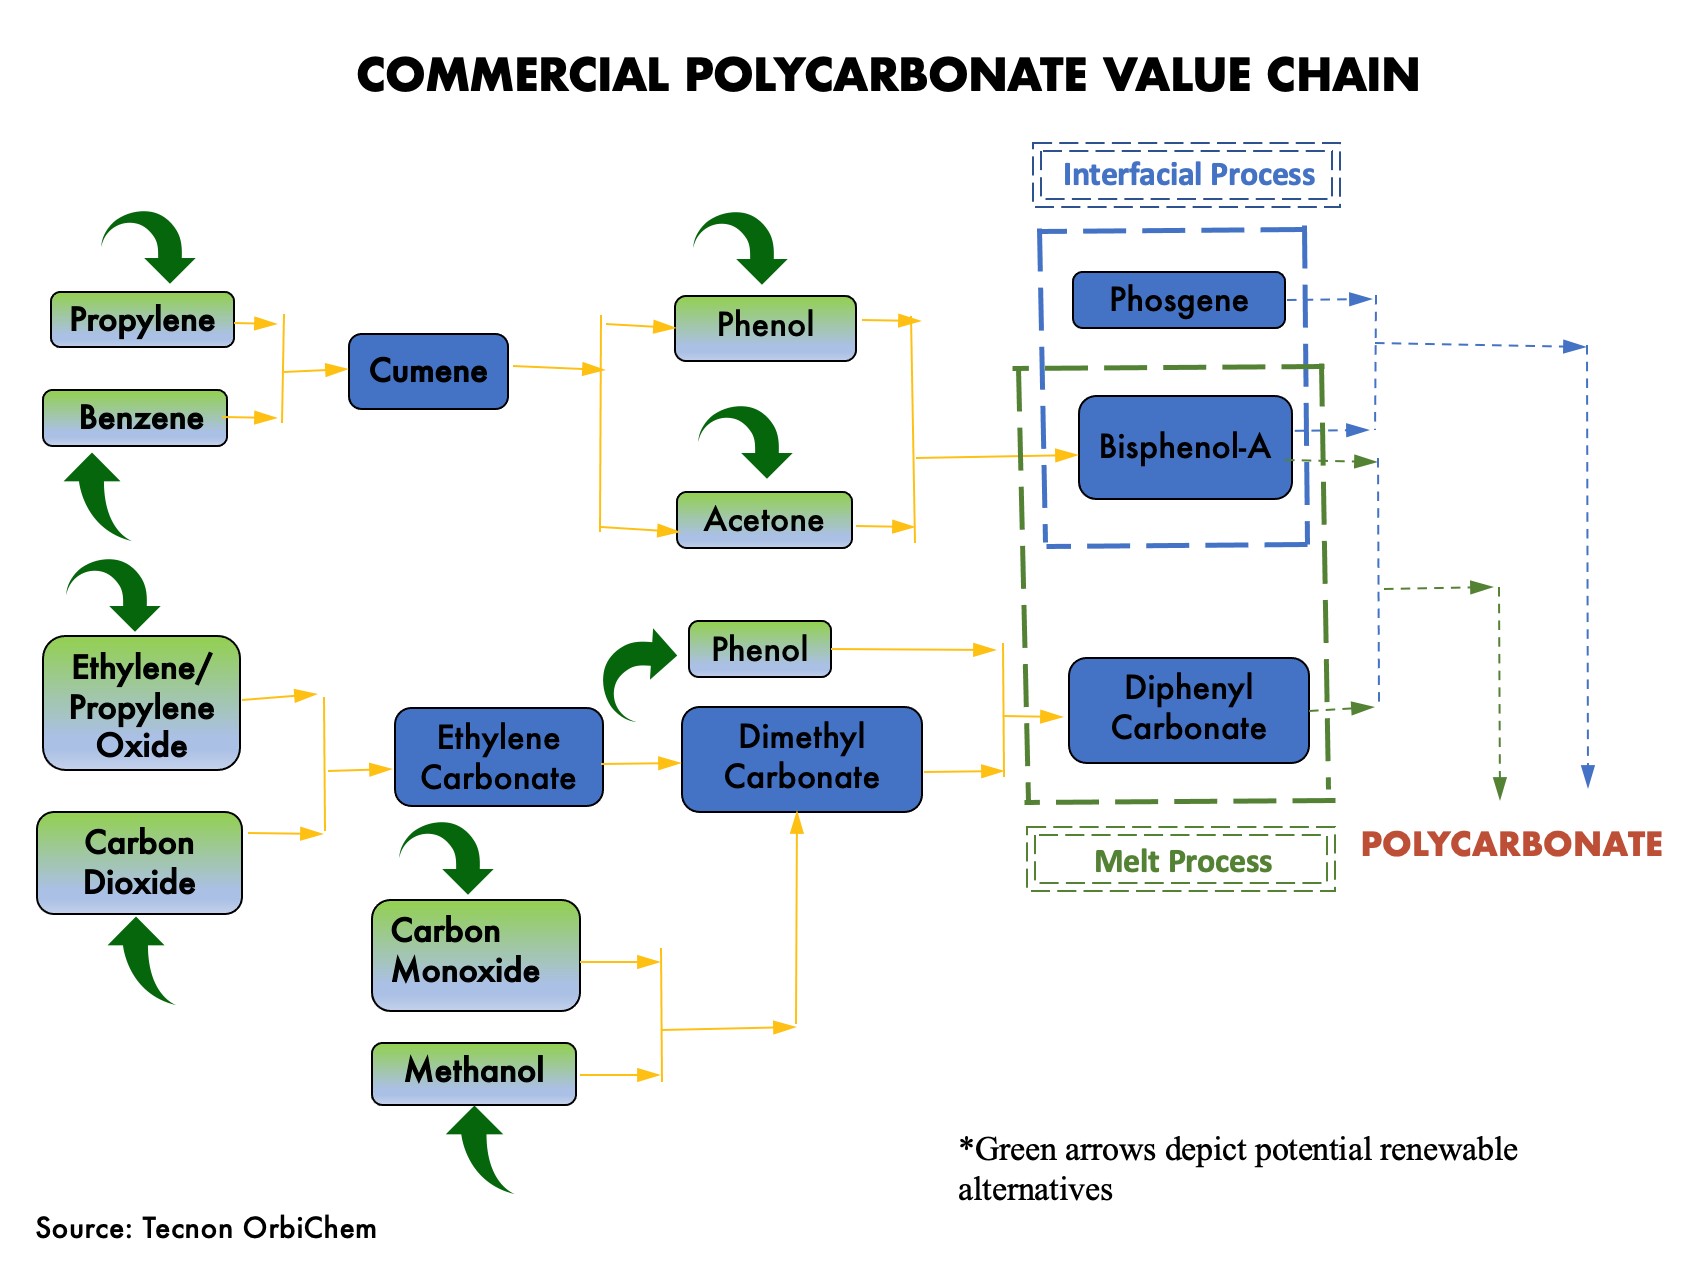 Image shows a schematic diagram of the commercial polycarbonate value chain including chemicals that can be swapped for renewable feedstocks